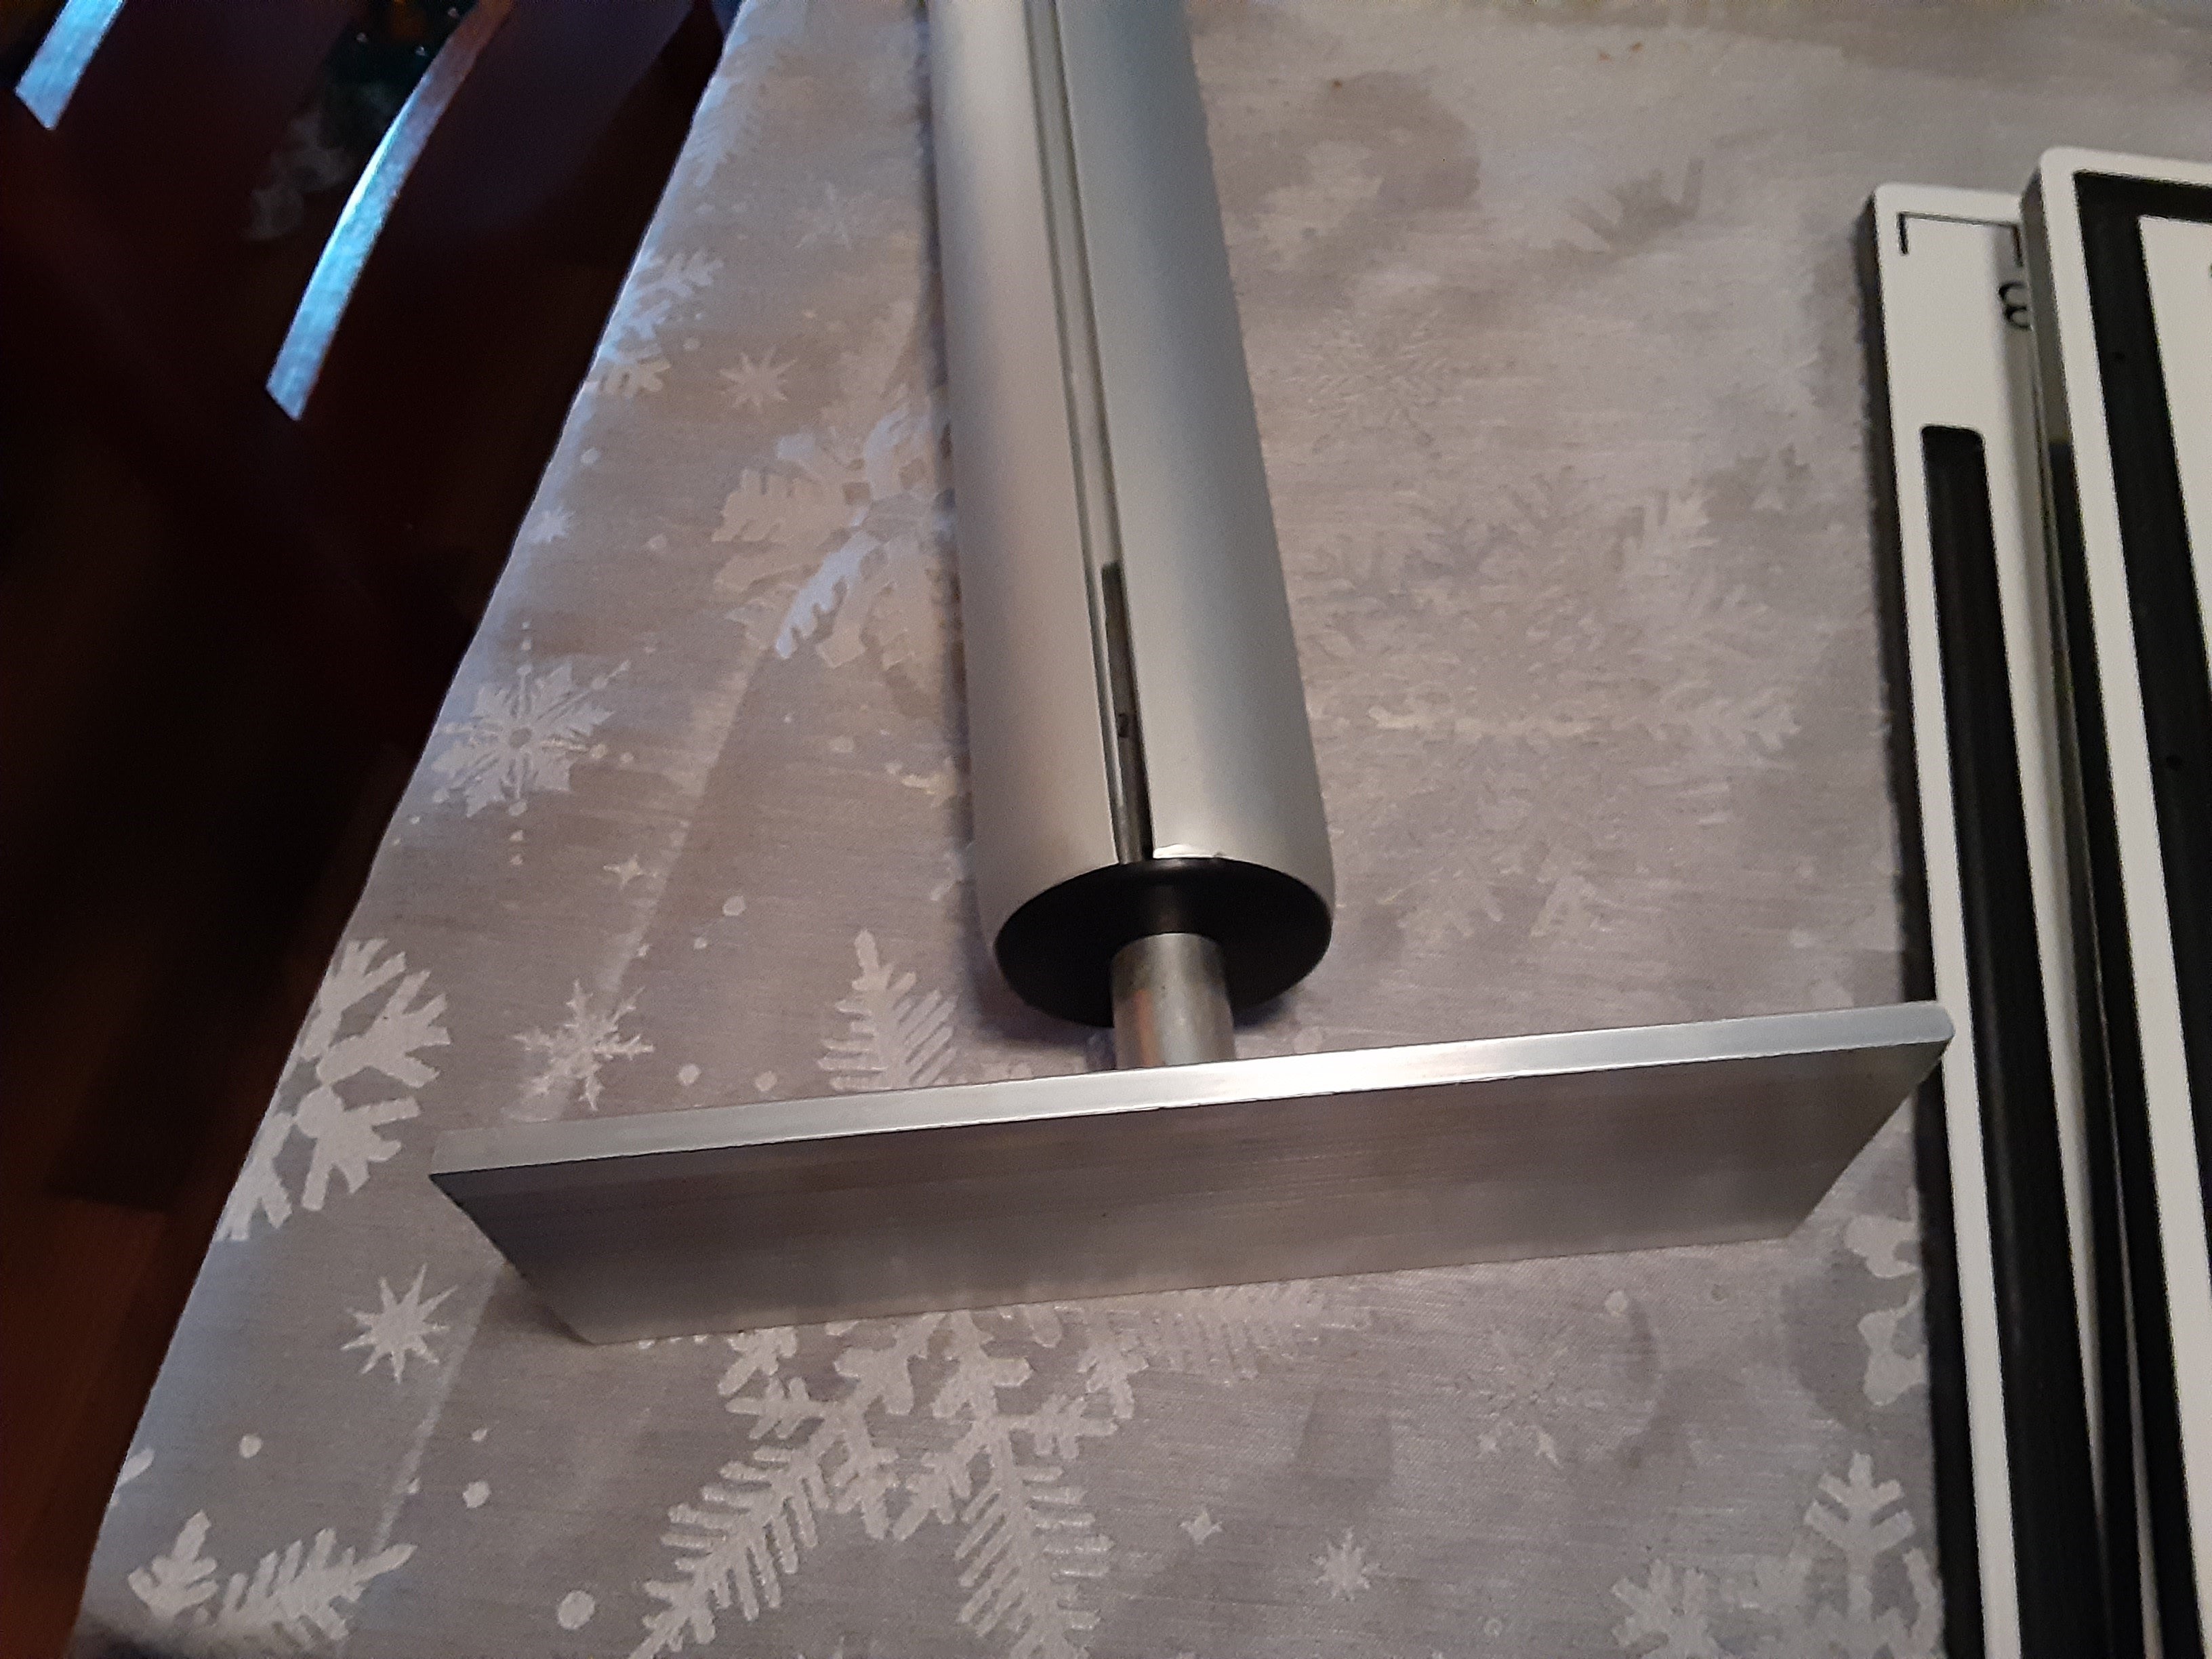 Seat post mount for cutting board (fits into top of seat post)